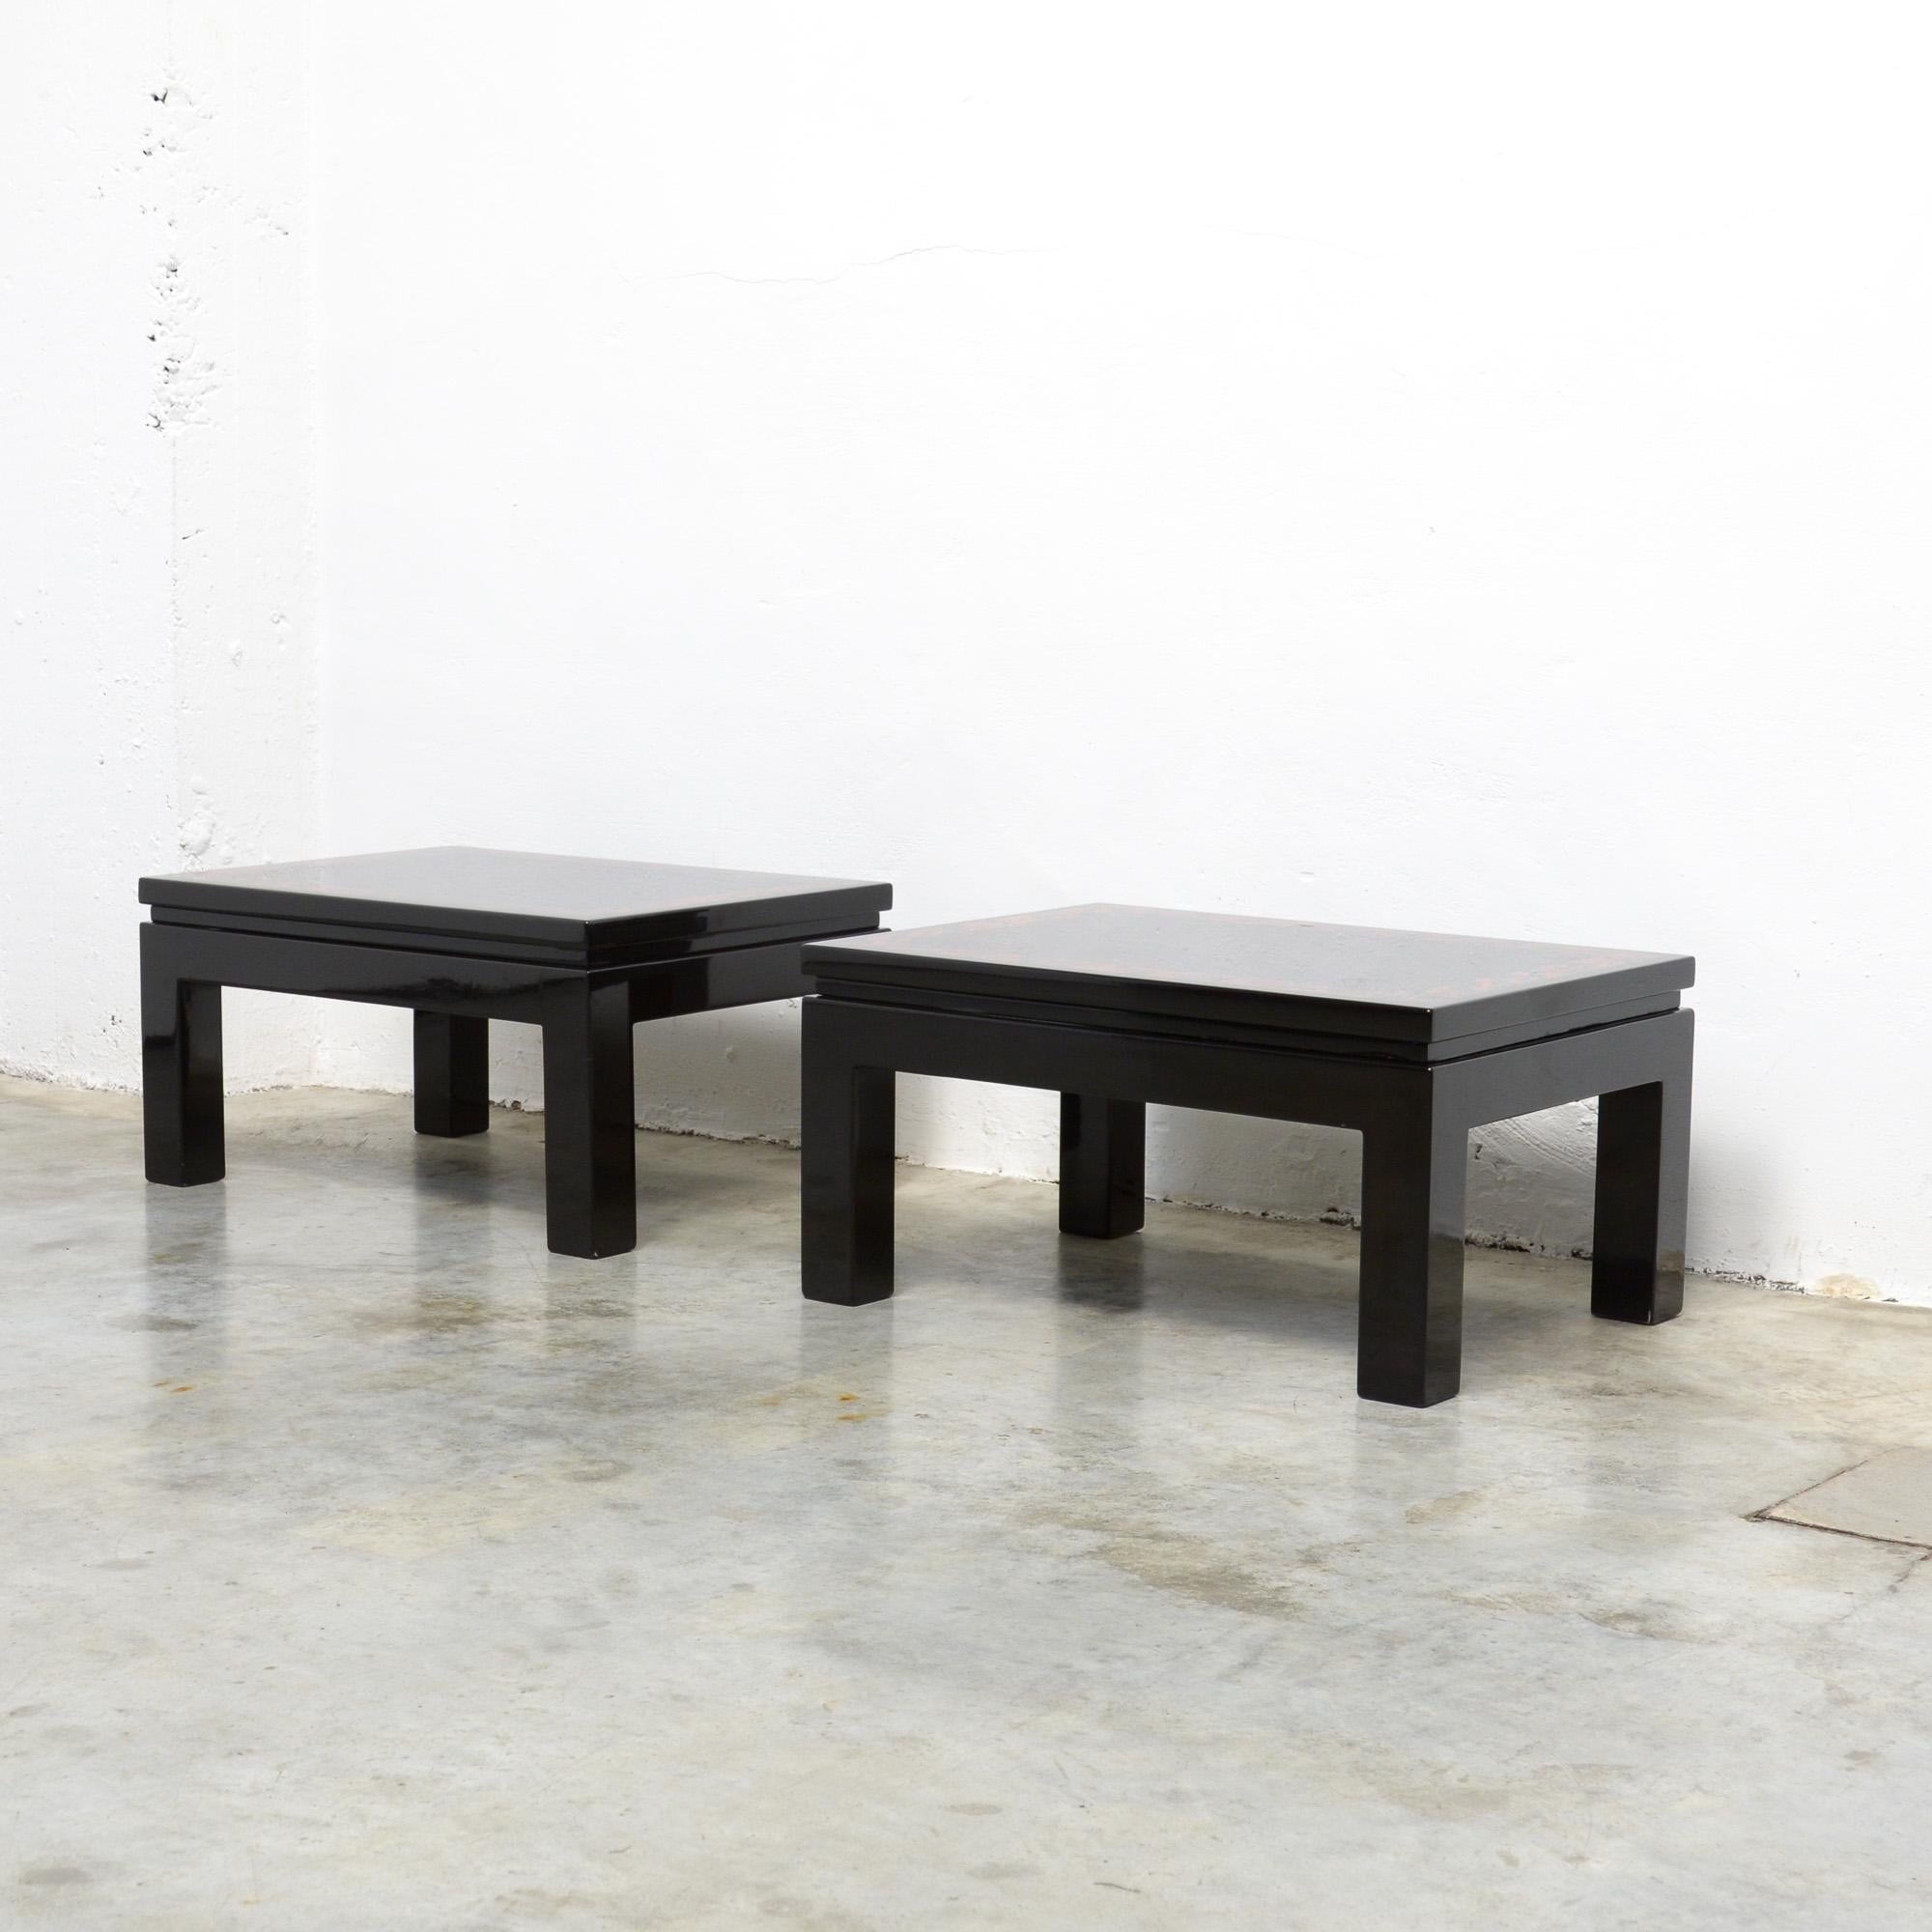 This stylish pair of side tables was designed and created in the Atelier of Marcel and Jean Claude Dresse. They can be dated in the 1970s.
The tables are made of glossy black lacquered resin on wood, with faux tordoise shell inlay.
The tables are